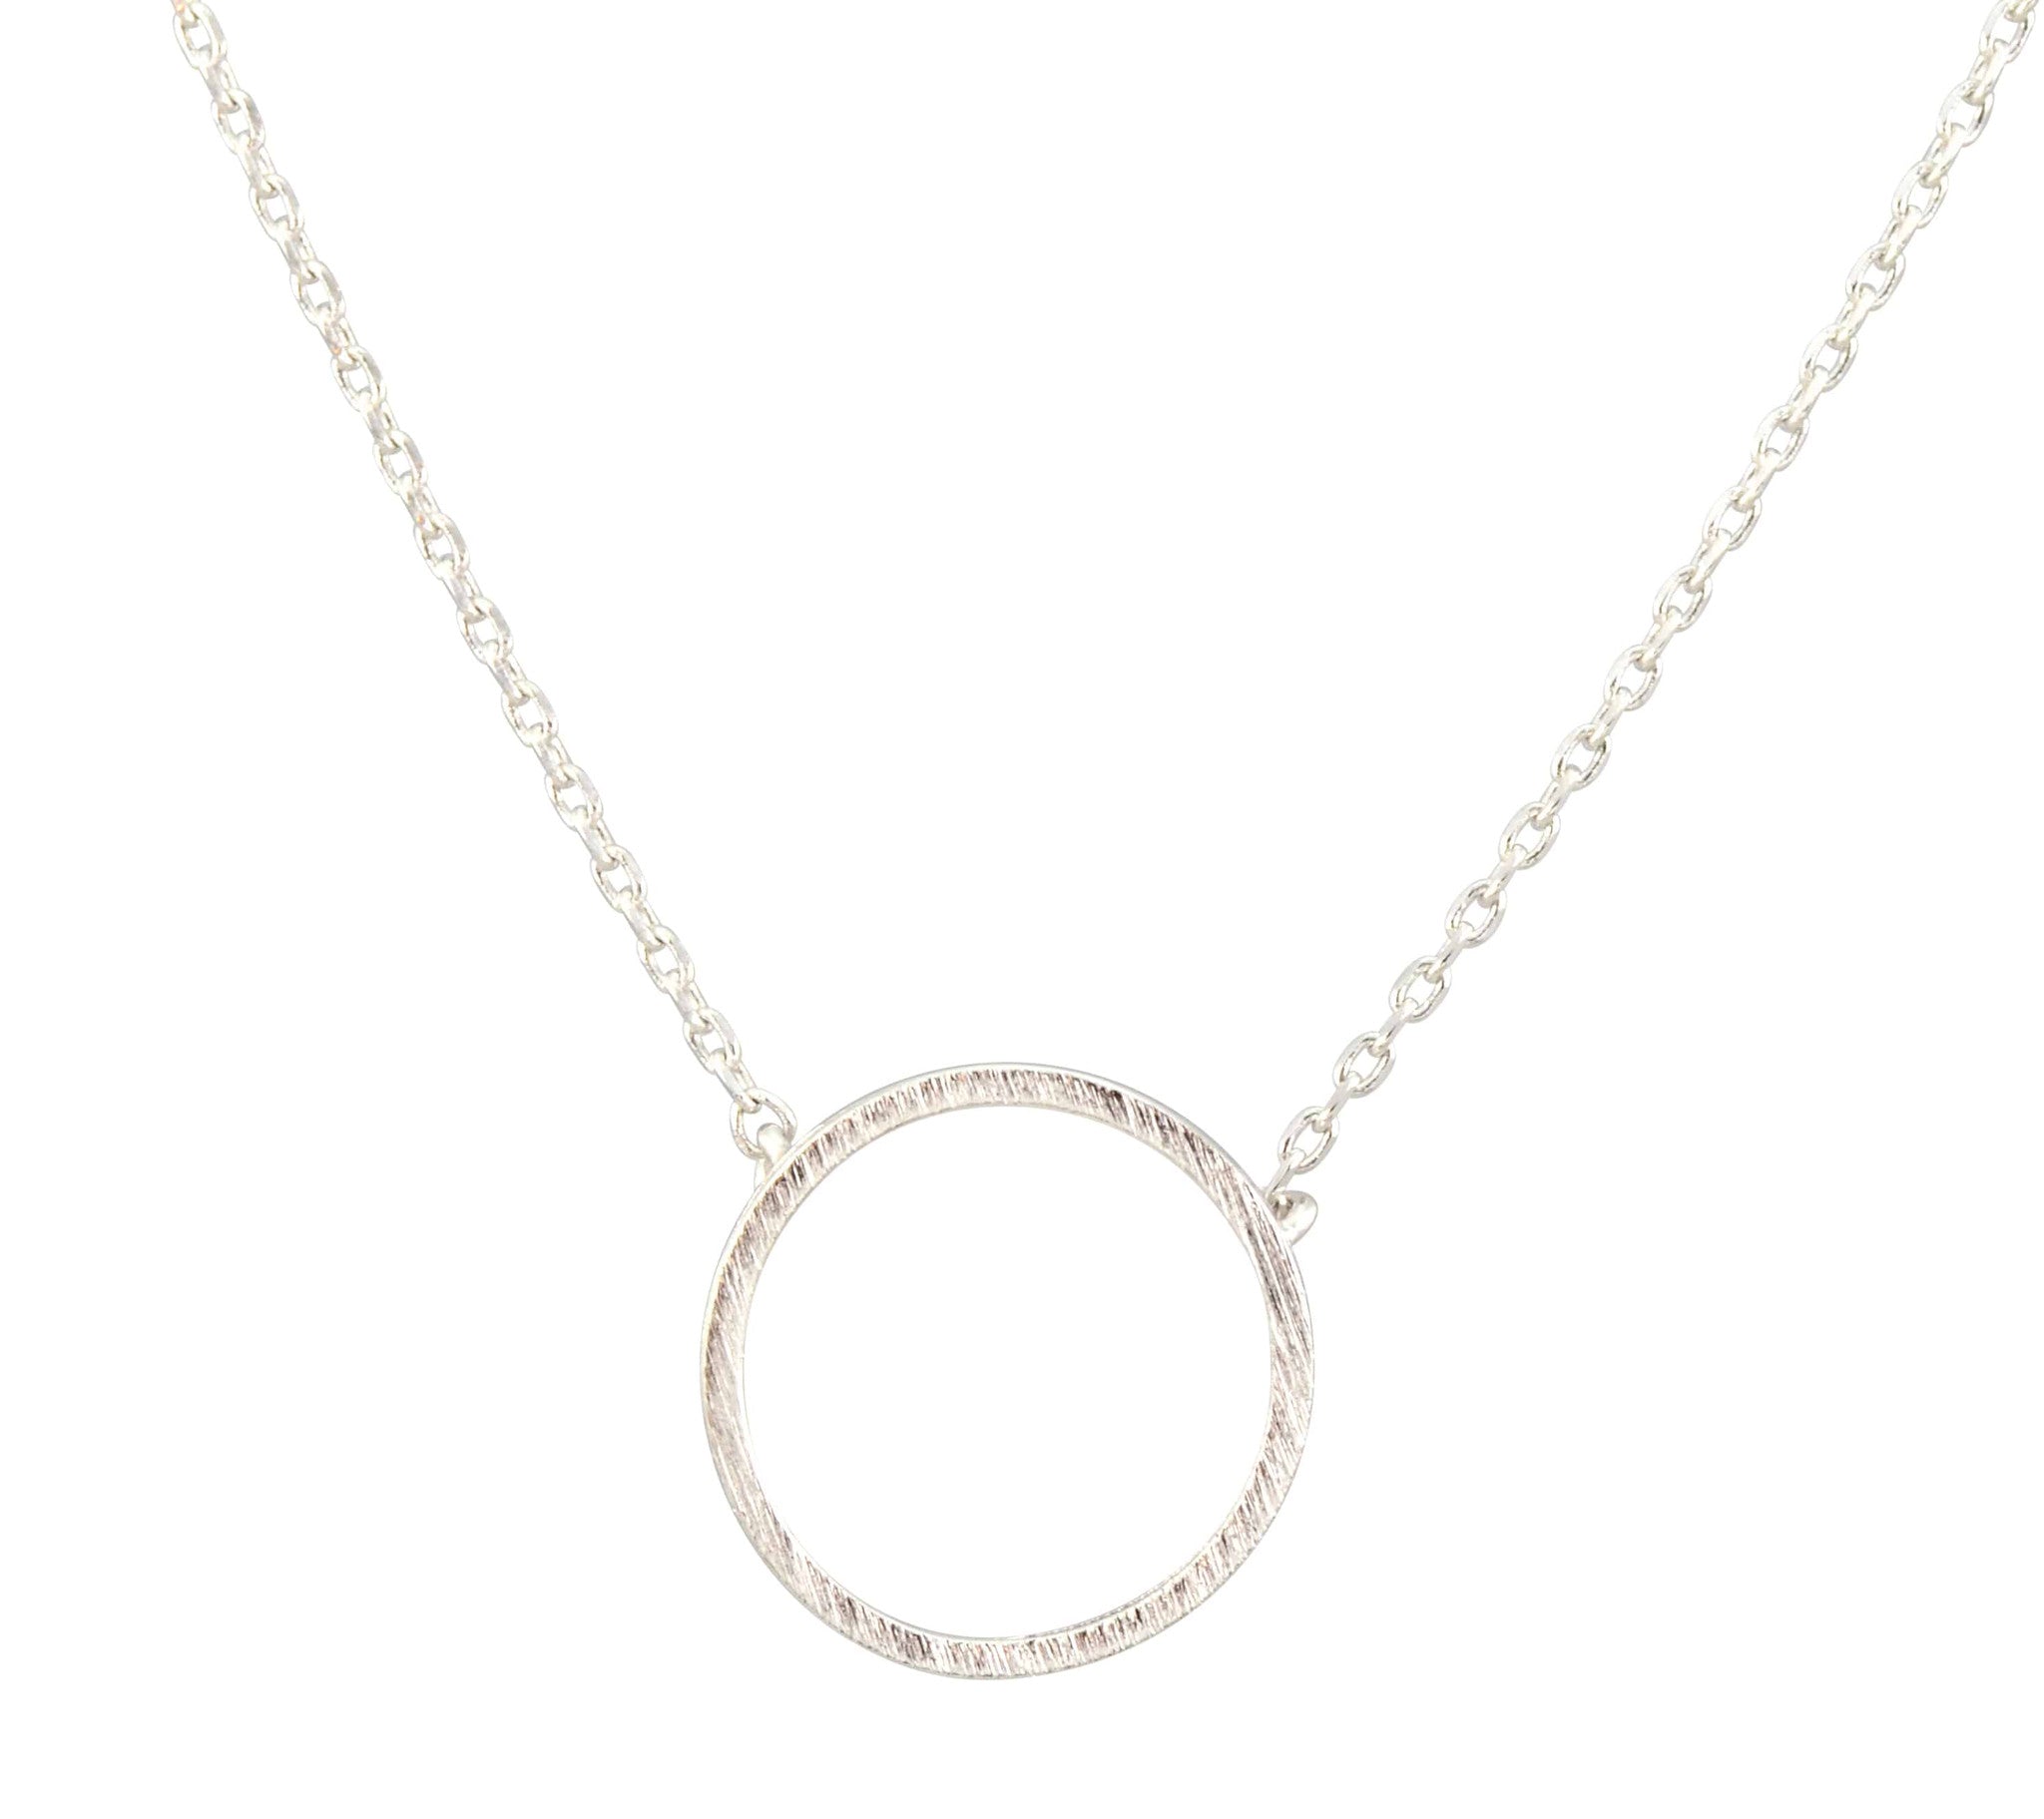 Enreverie Circle Necklace, Silver Plated Pendant, 16